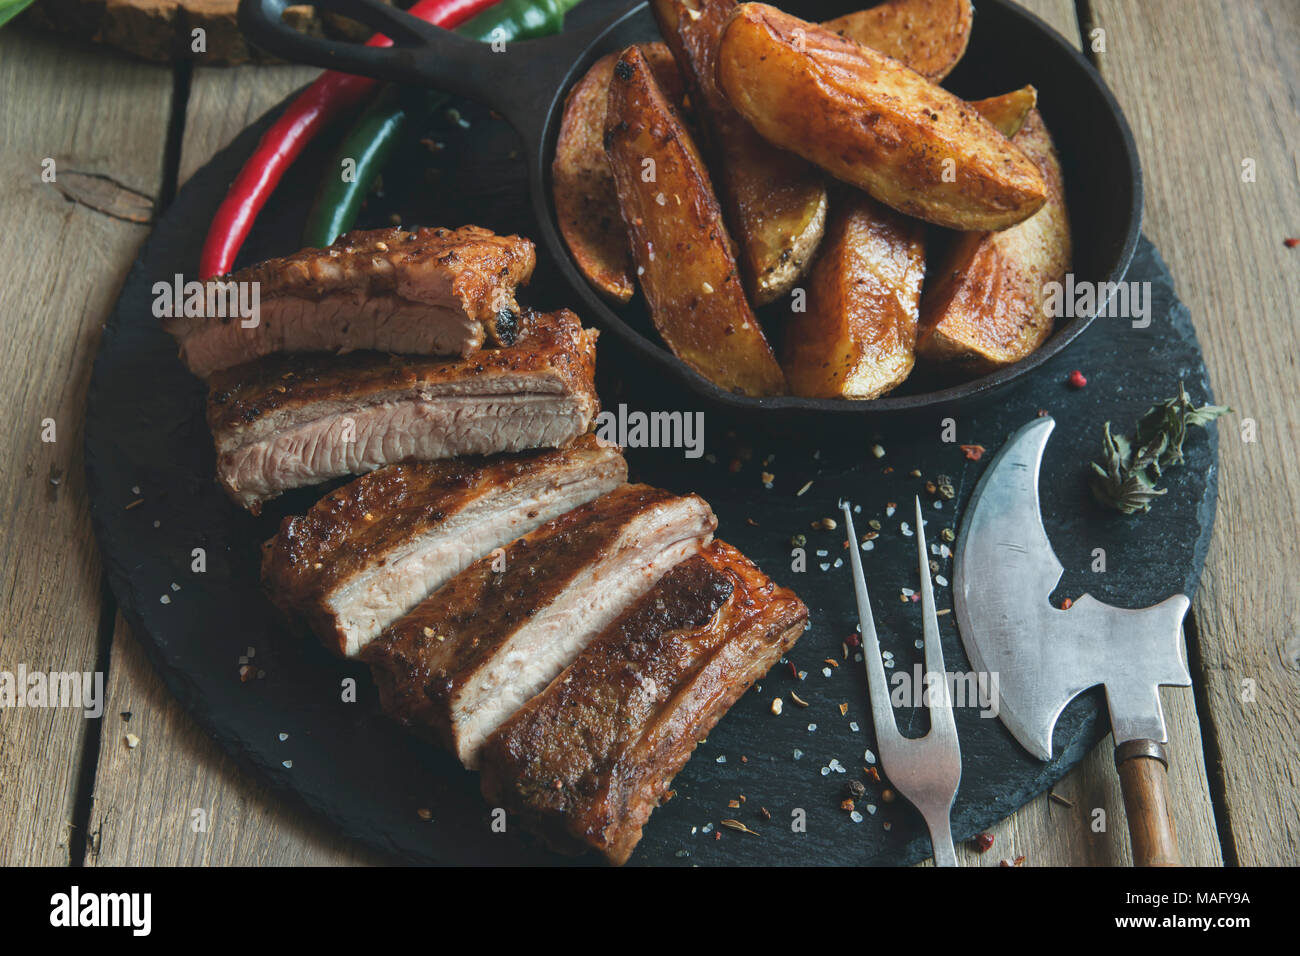 fried pork ribs with potatoes and spices Stock Photo